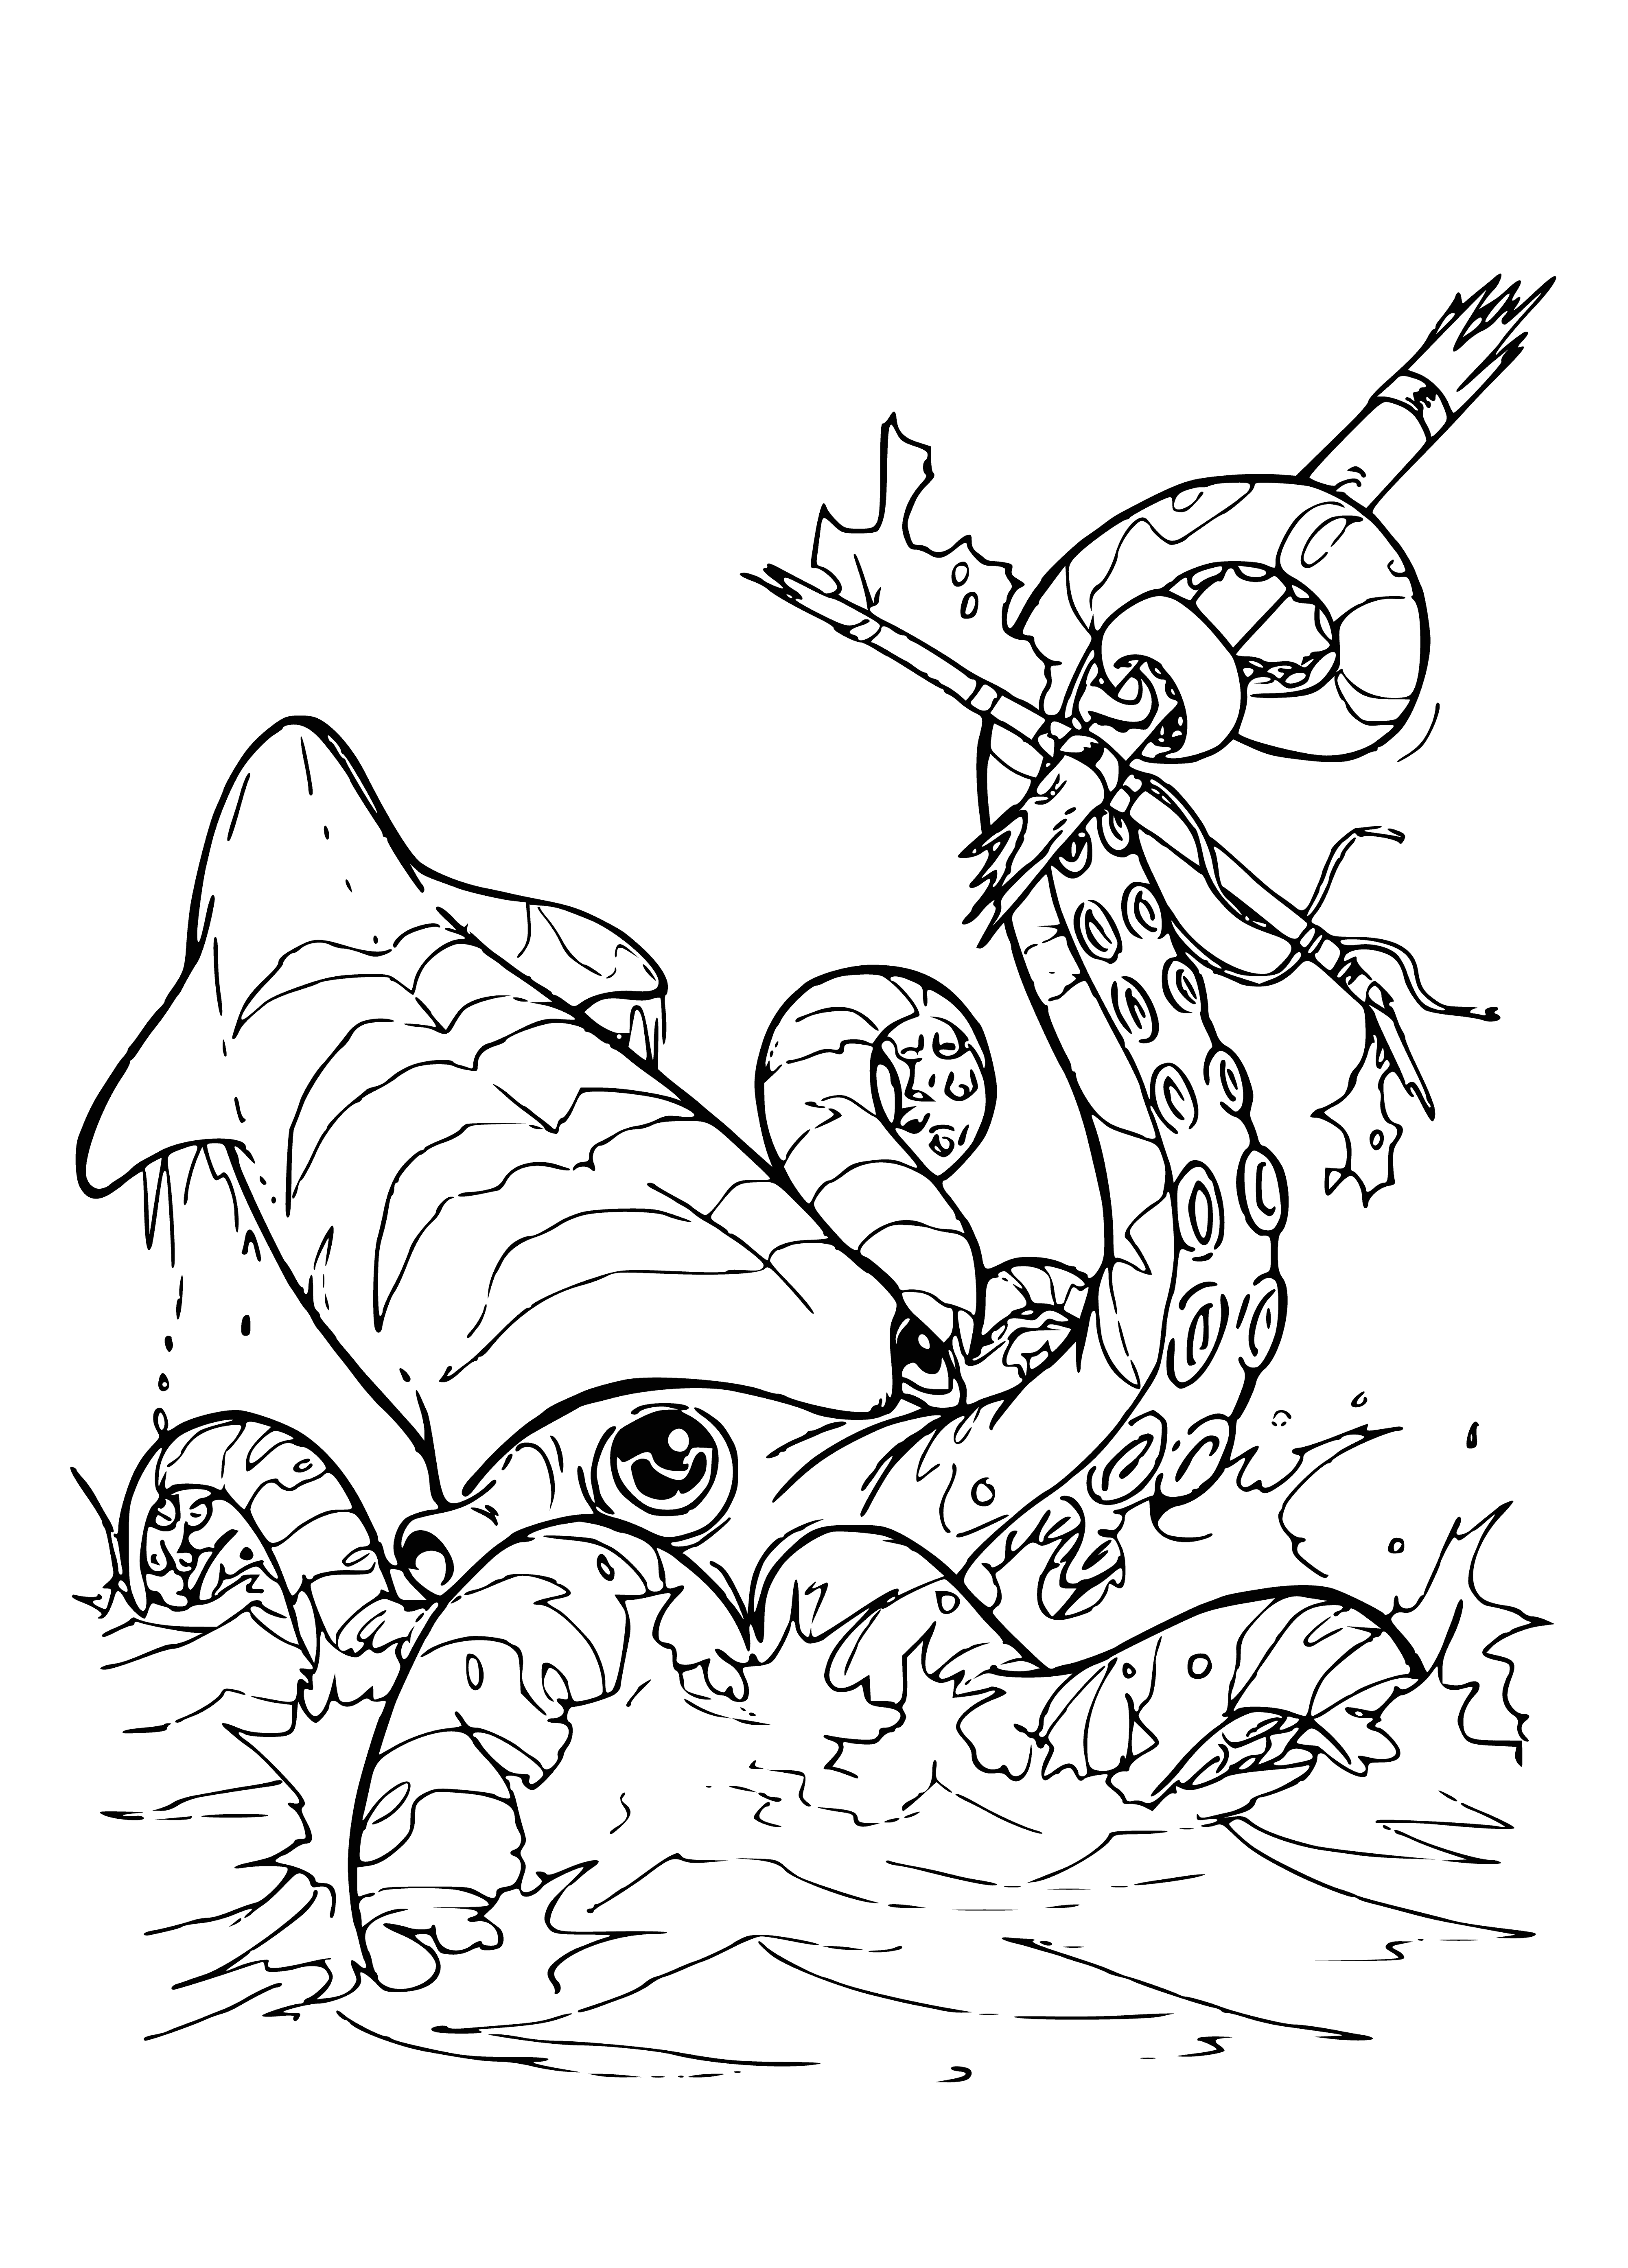 Horrible octopus coloring page